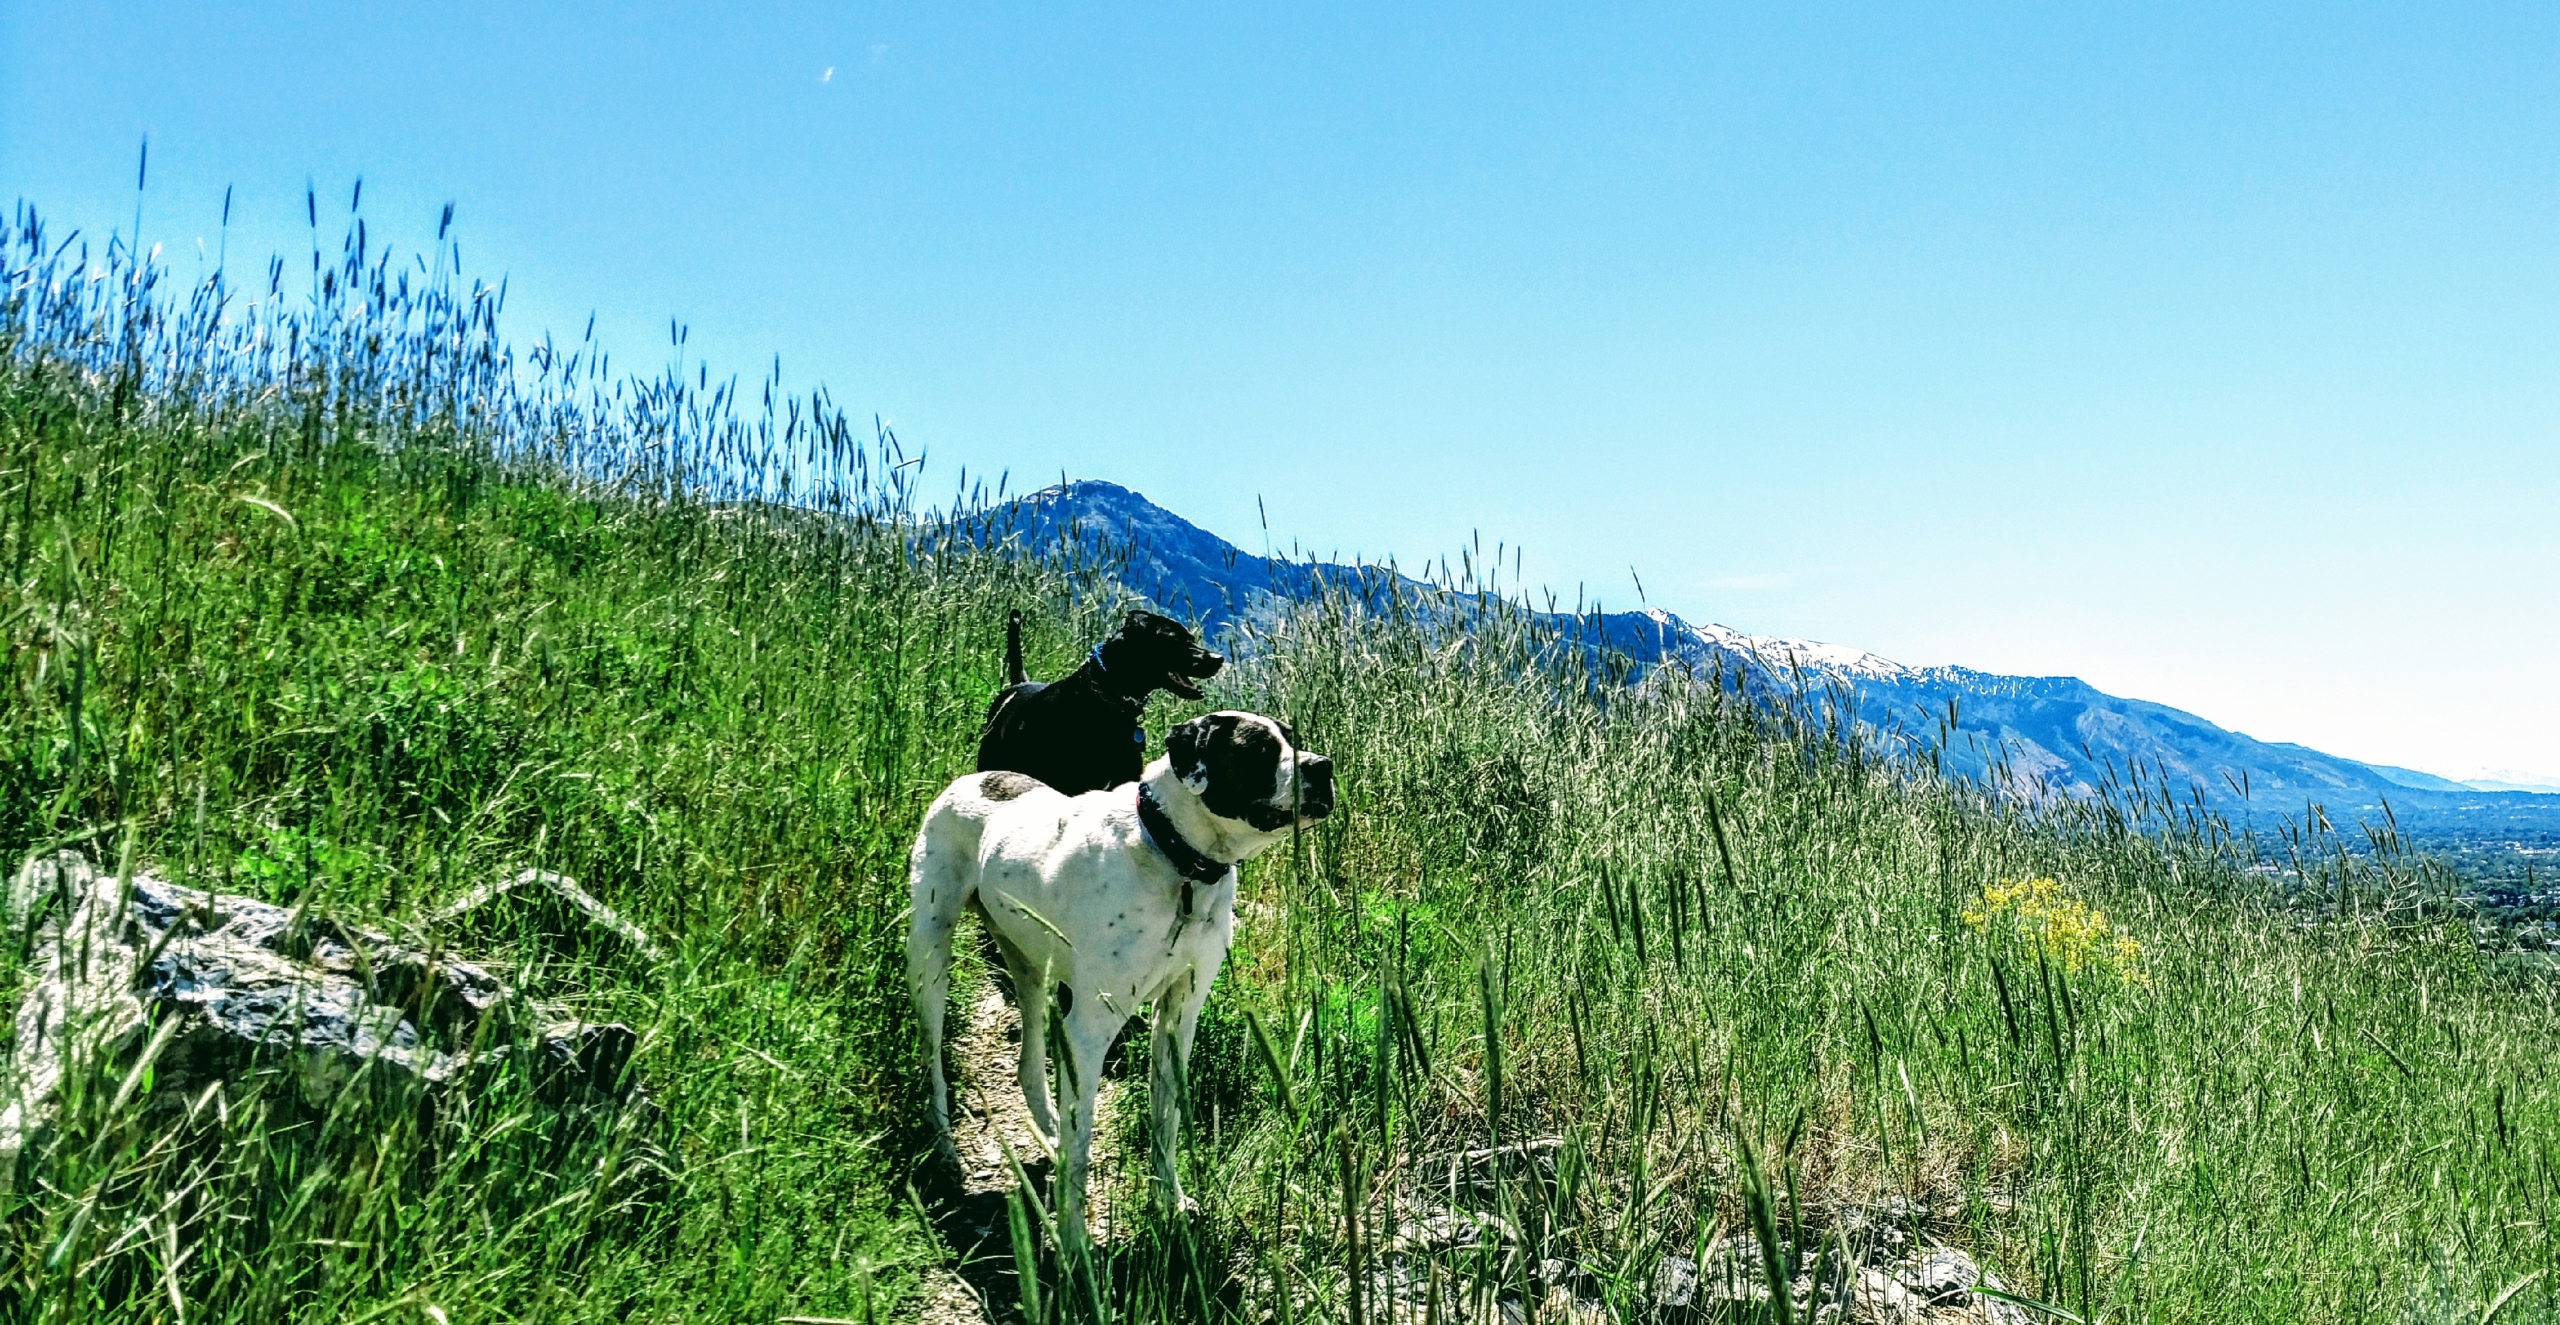 a brown and white dog stands in front of a black dog. They are in a field of tall, green grass in the hills, under a blue sky